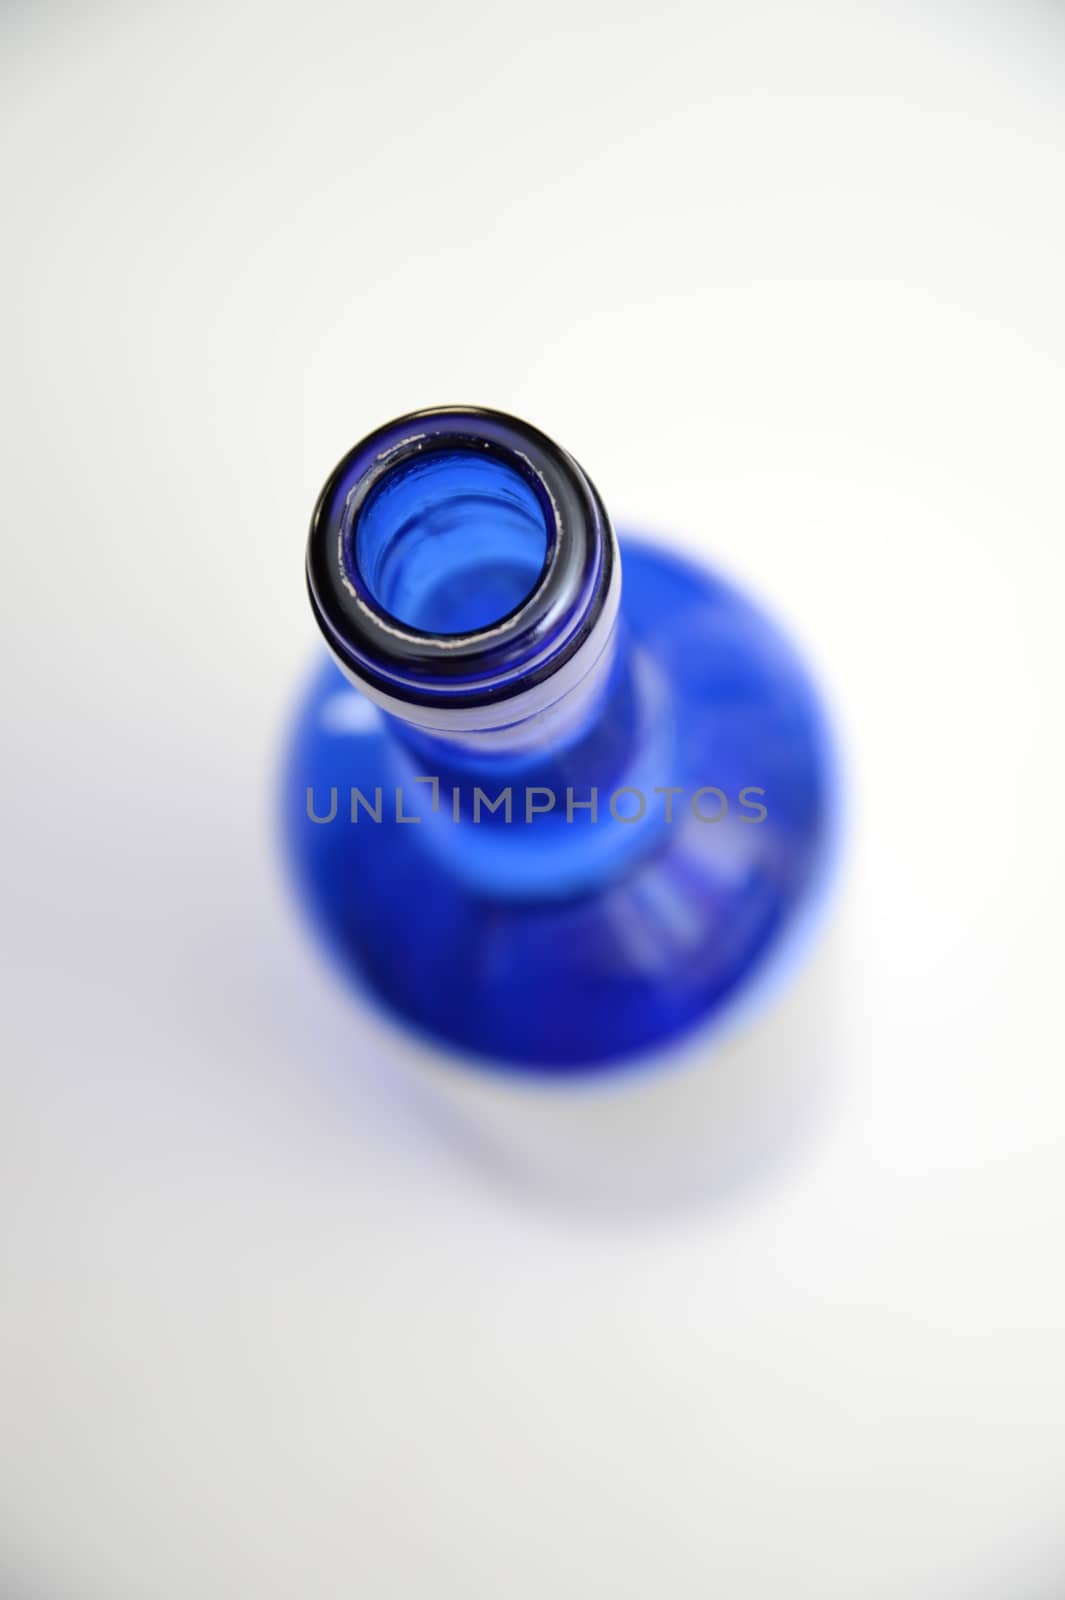 A water bottle against a white background